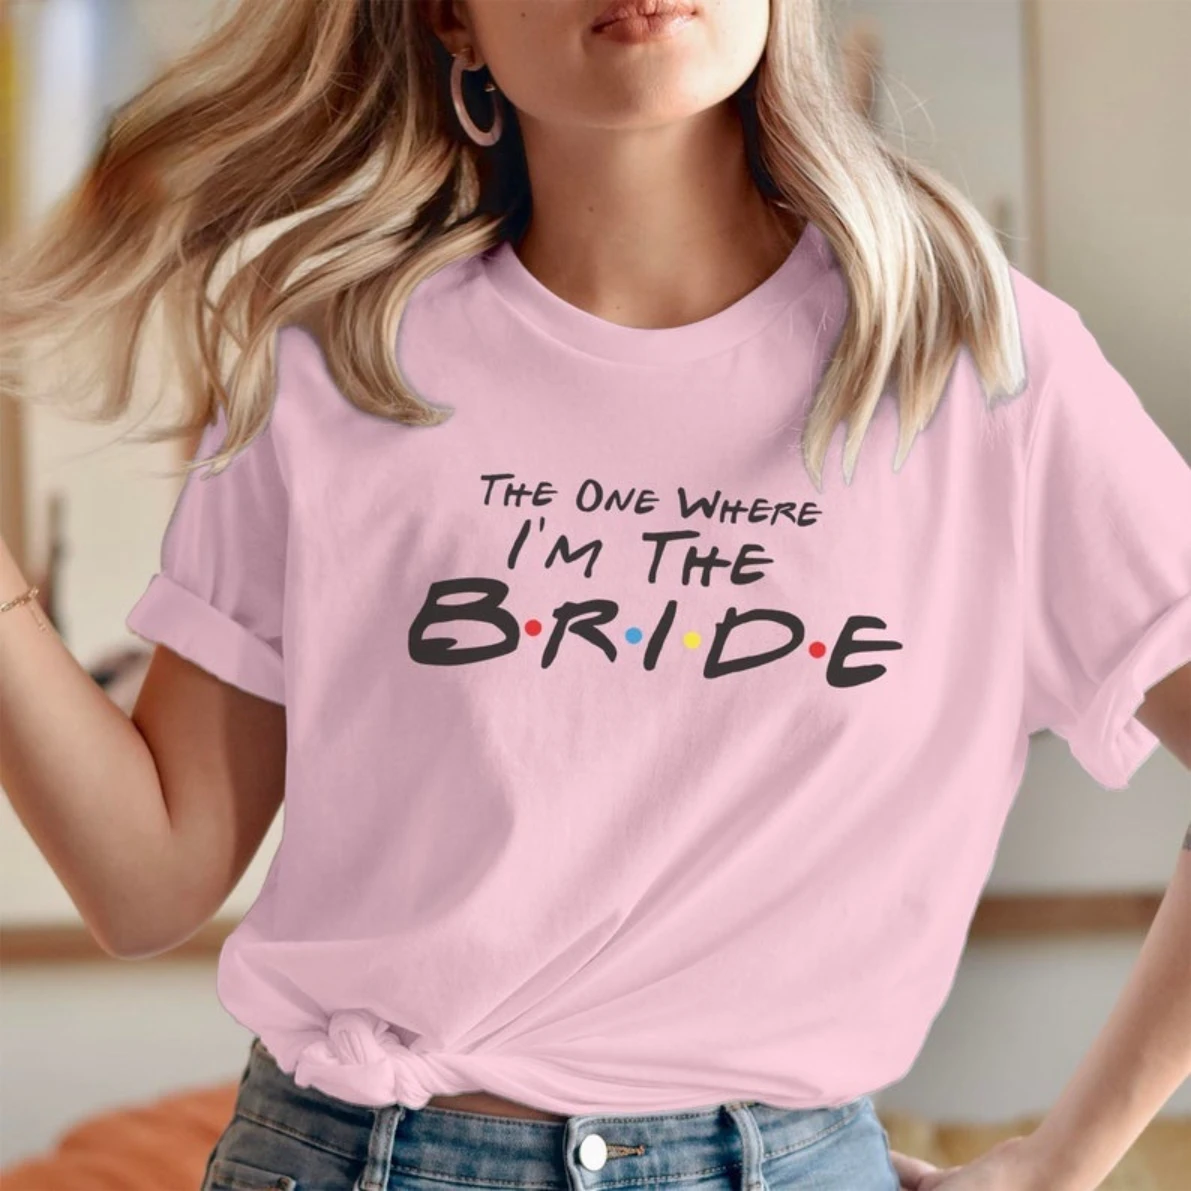 

The One Where I'm the BRIDE T shirt - Ladies Women's Girls Friends Bridesmaid Hen Party Friends Birthday Gift Top